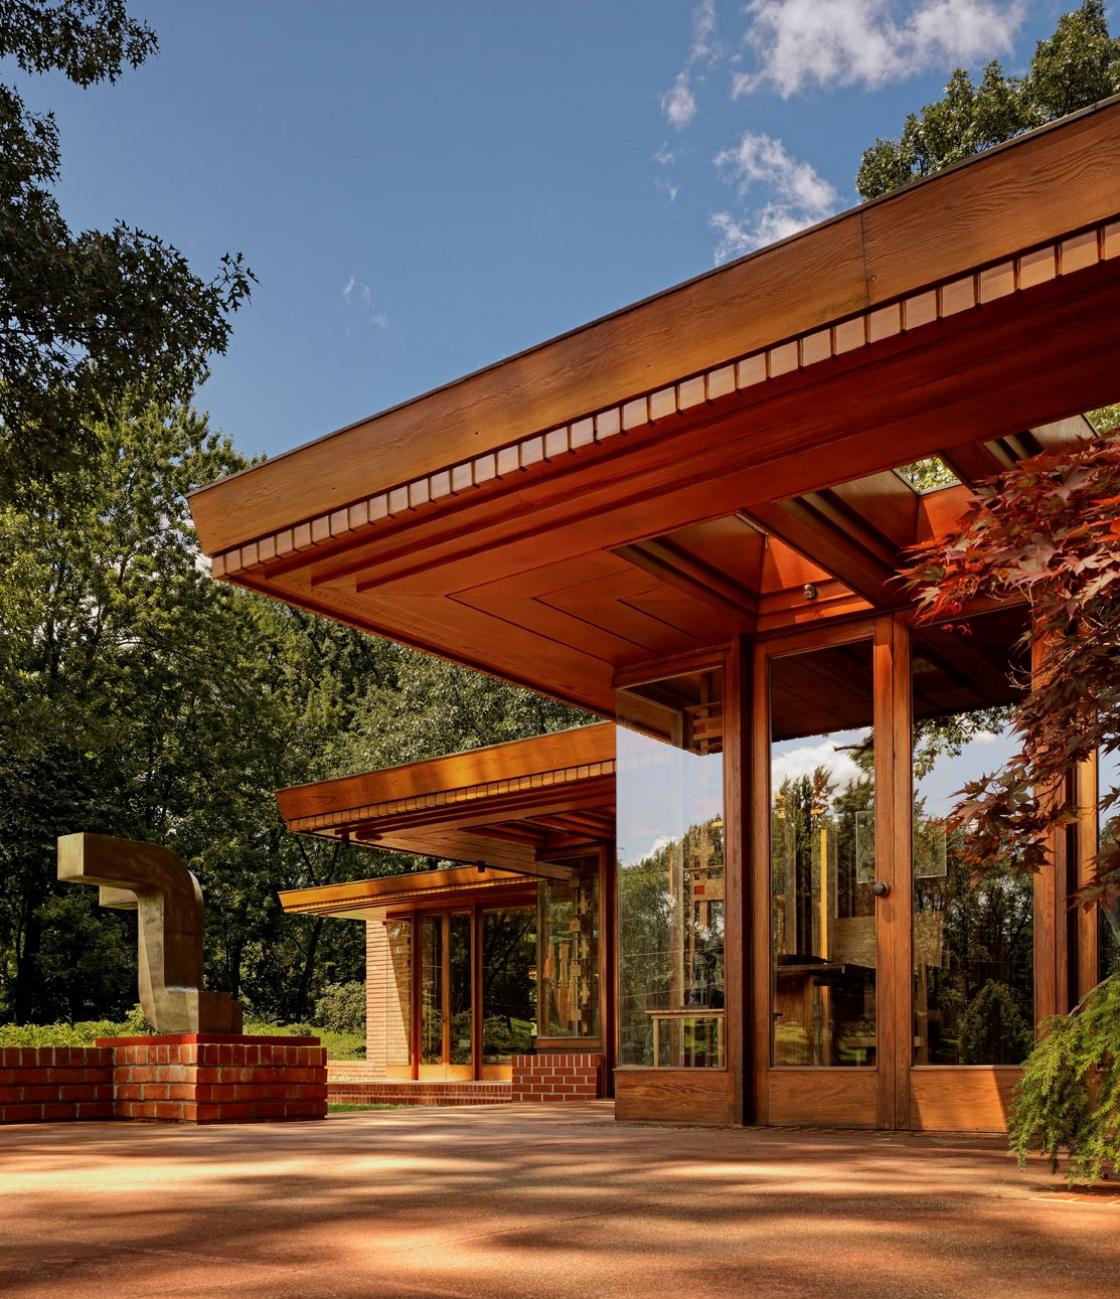 Photograph of the Frank Lloyd Wright designed Smith House.